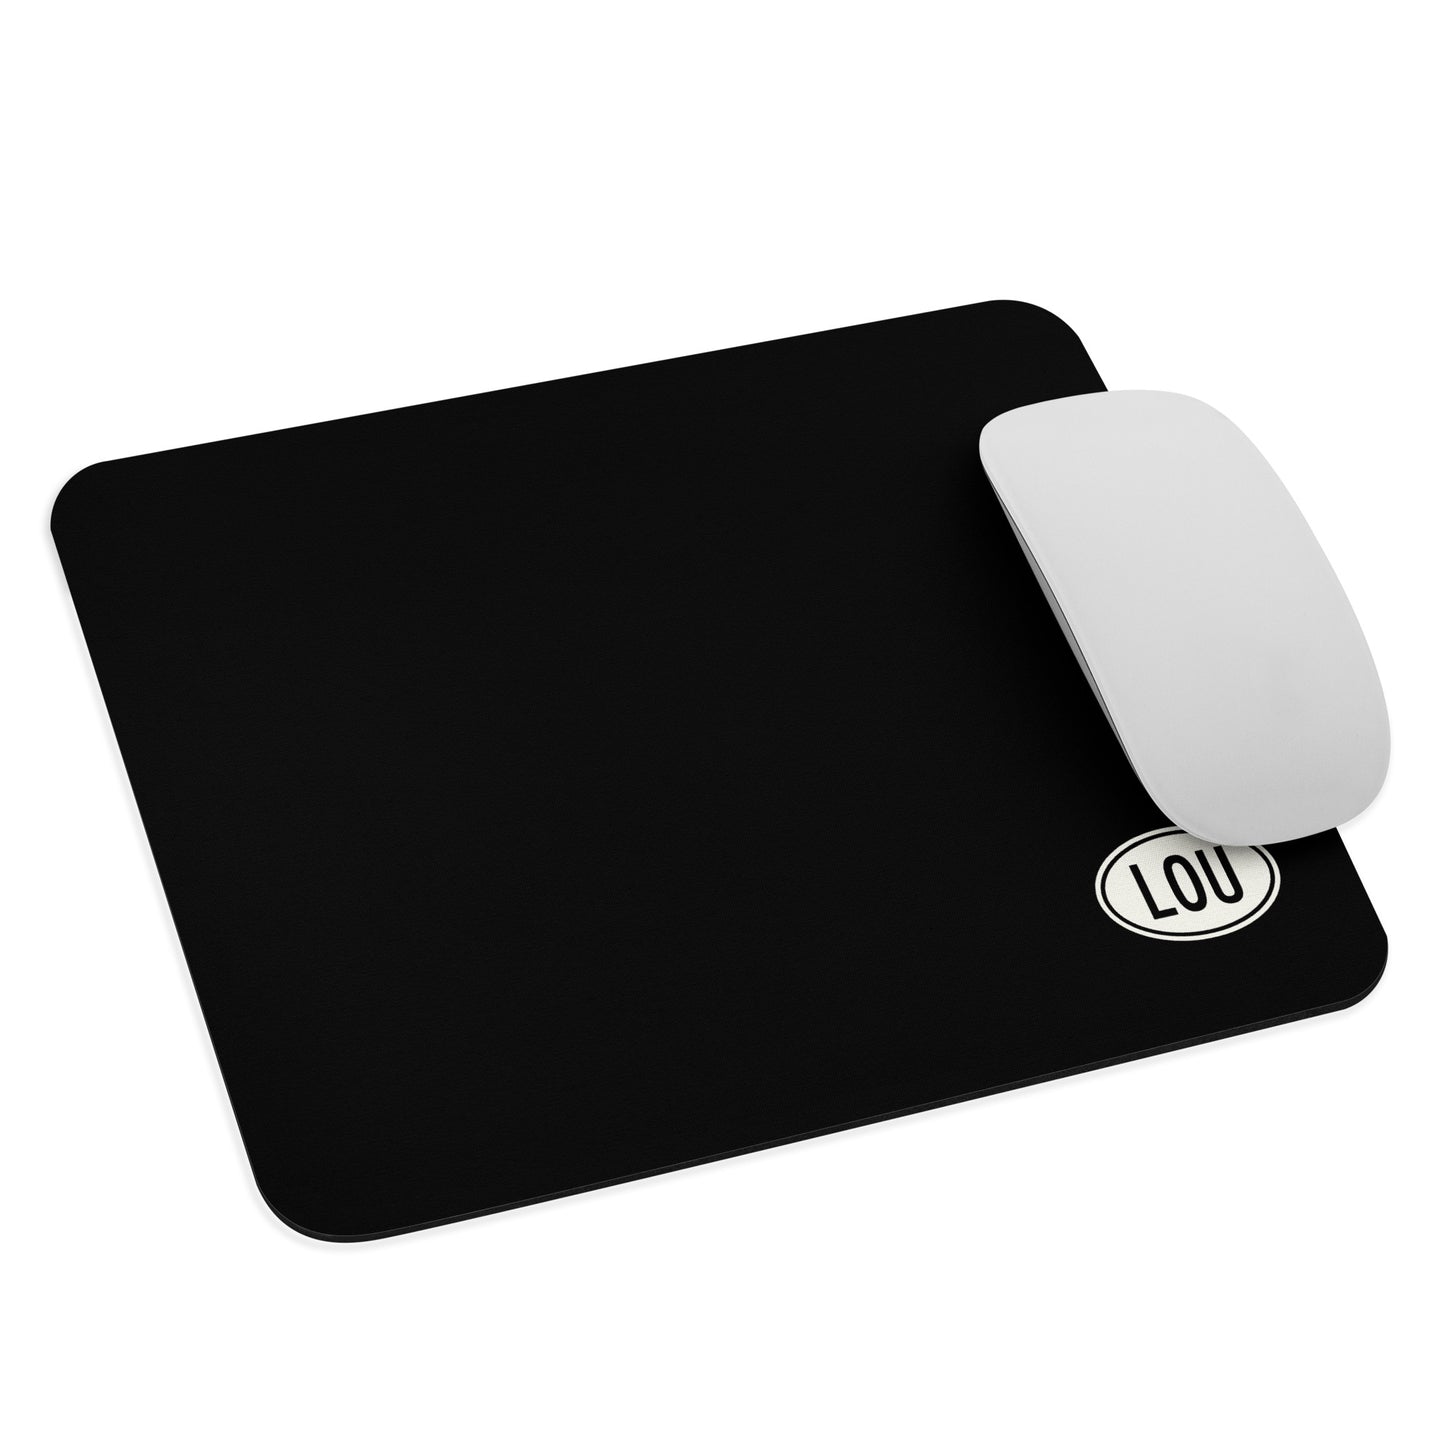 Unique Travel Gift Mouse Pad - White Oval • LOU Louisville • YHM Designs - Image 03